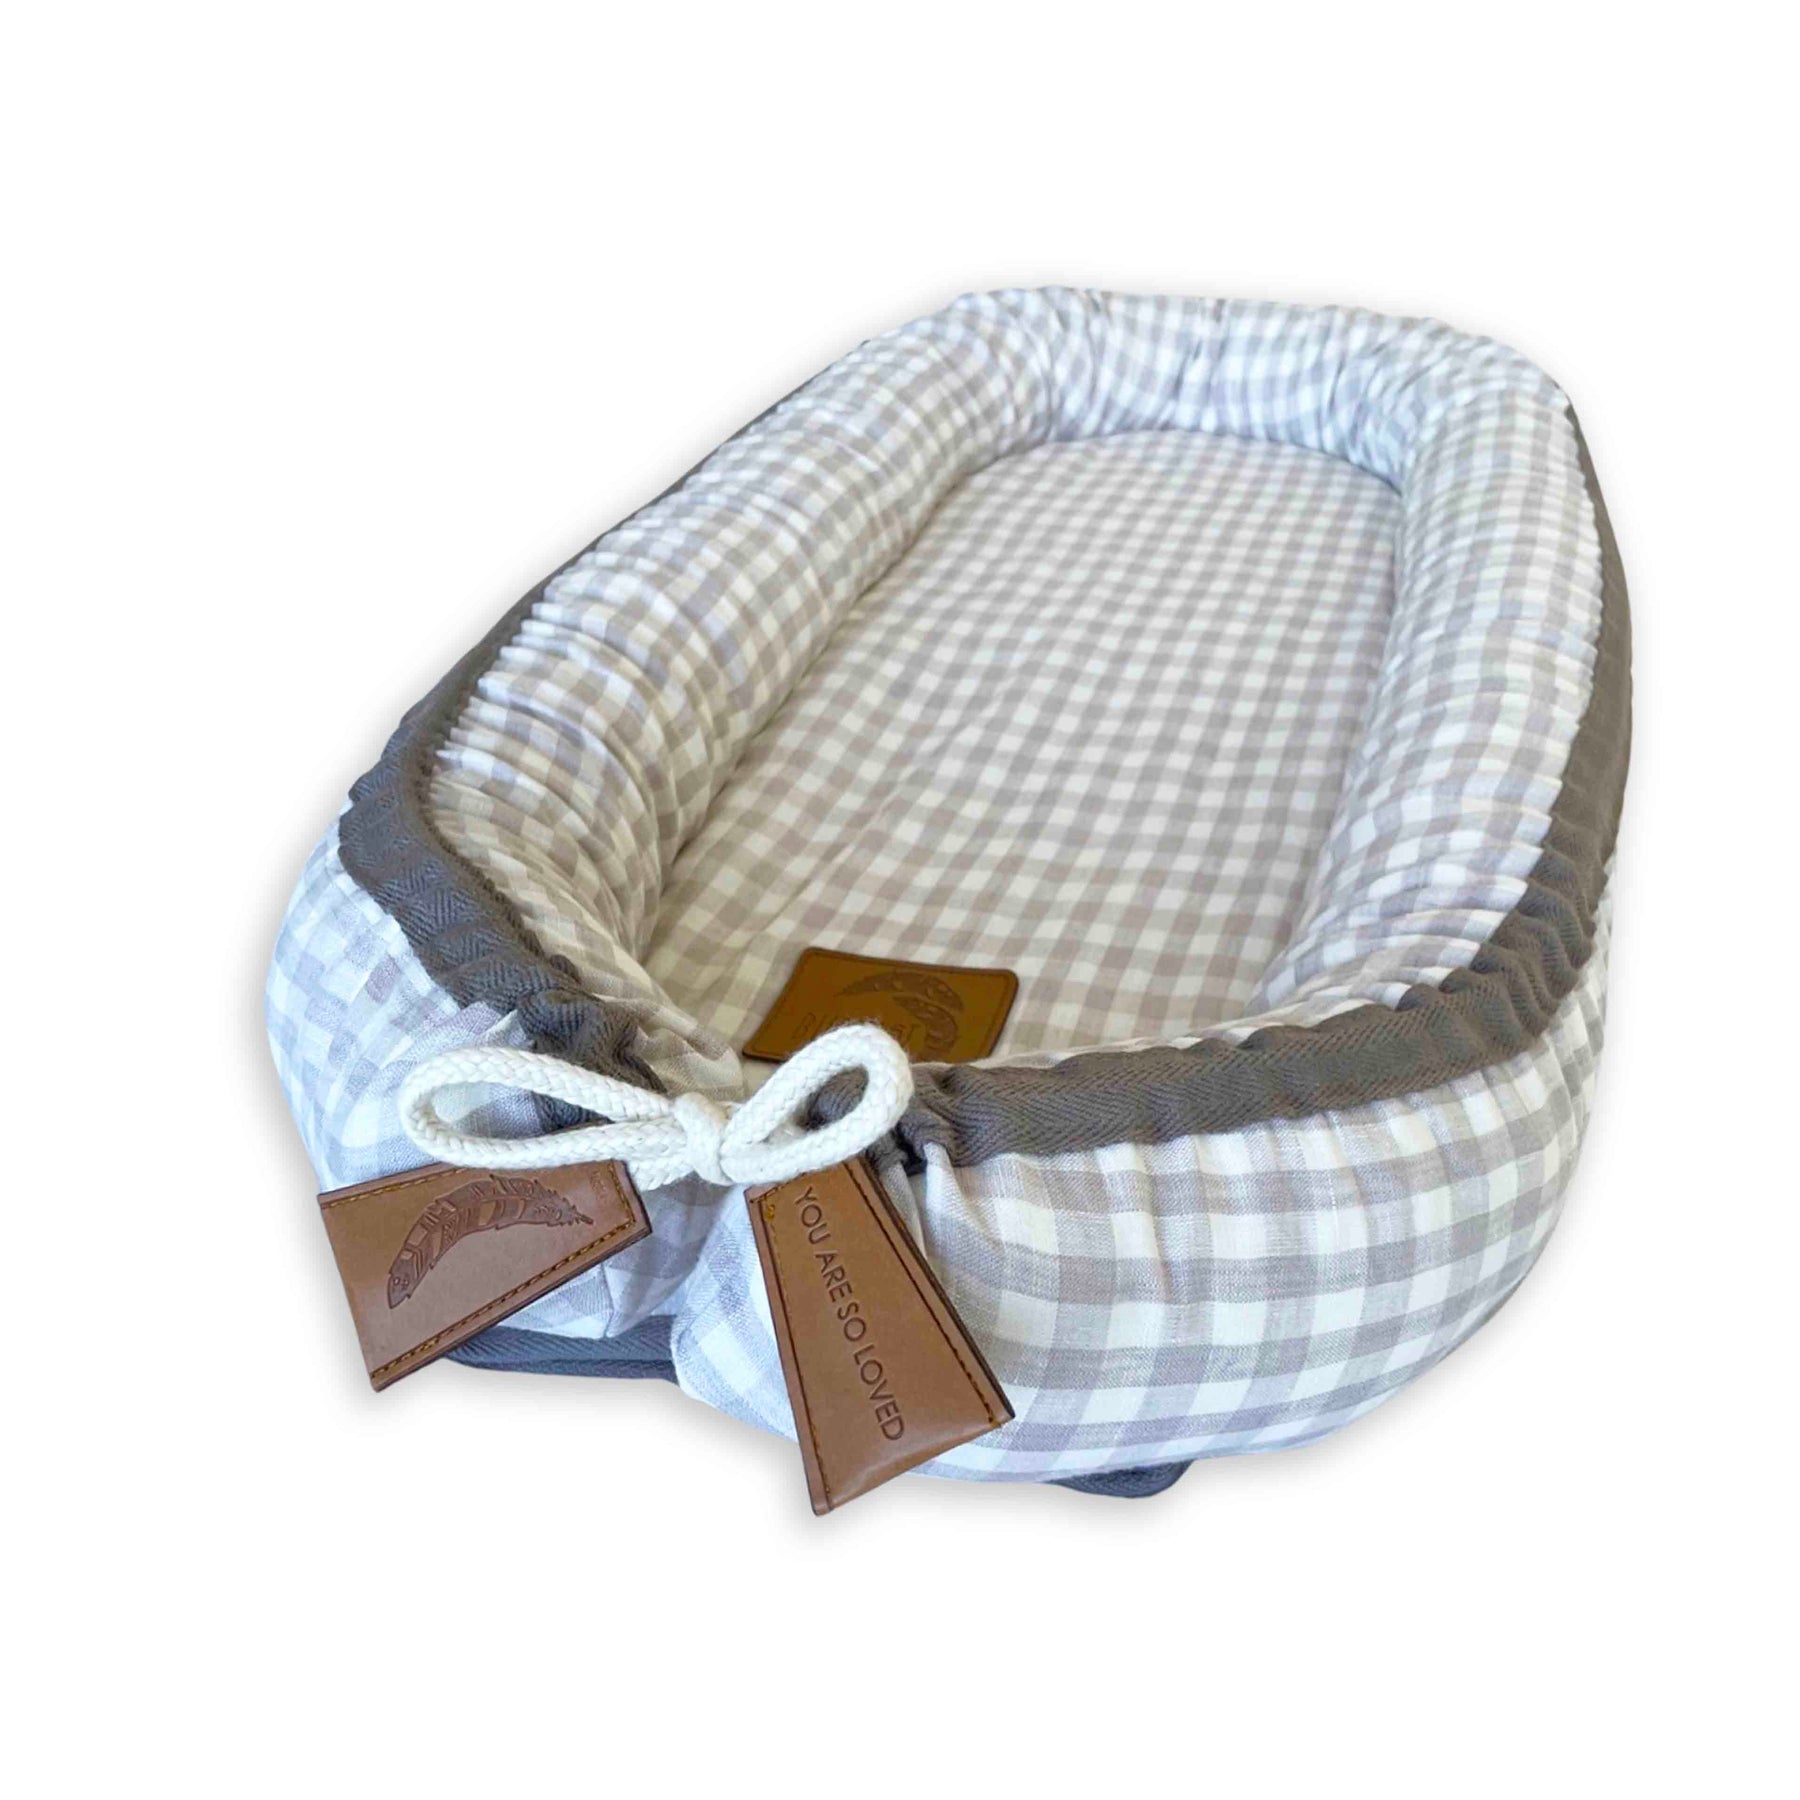 Baby Nest Cover - Soft Grey Gingham